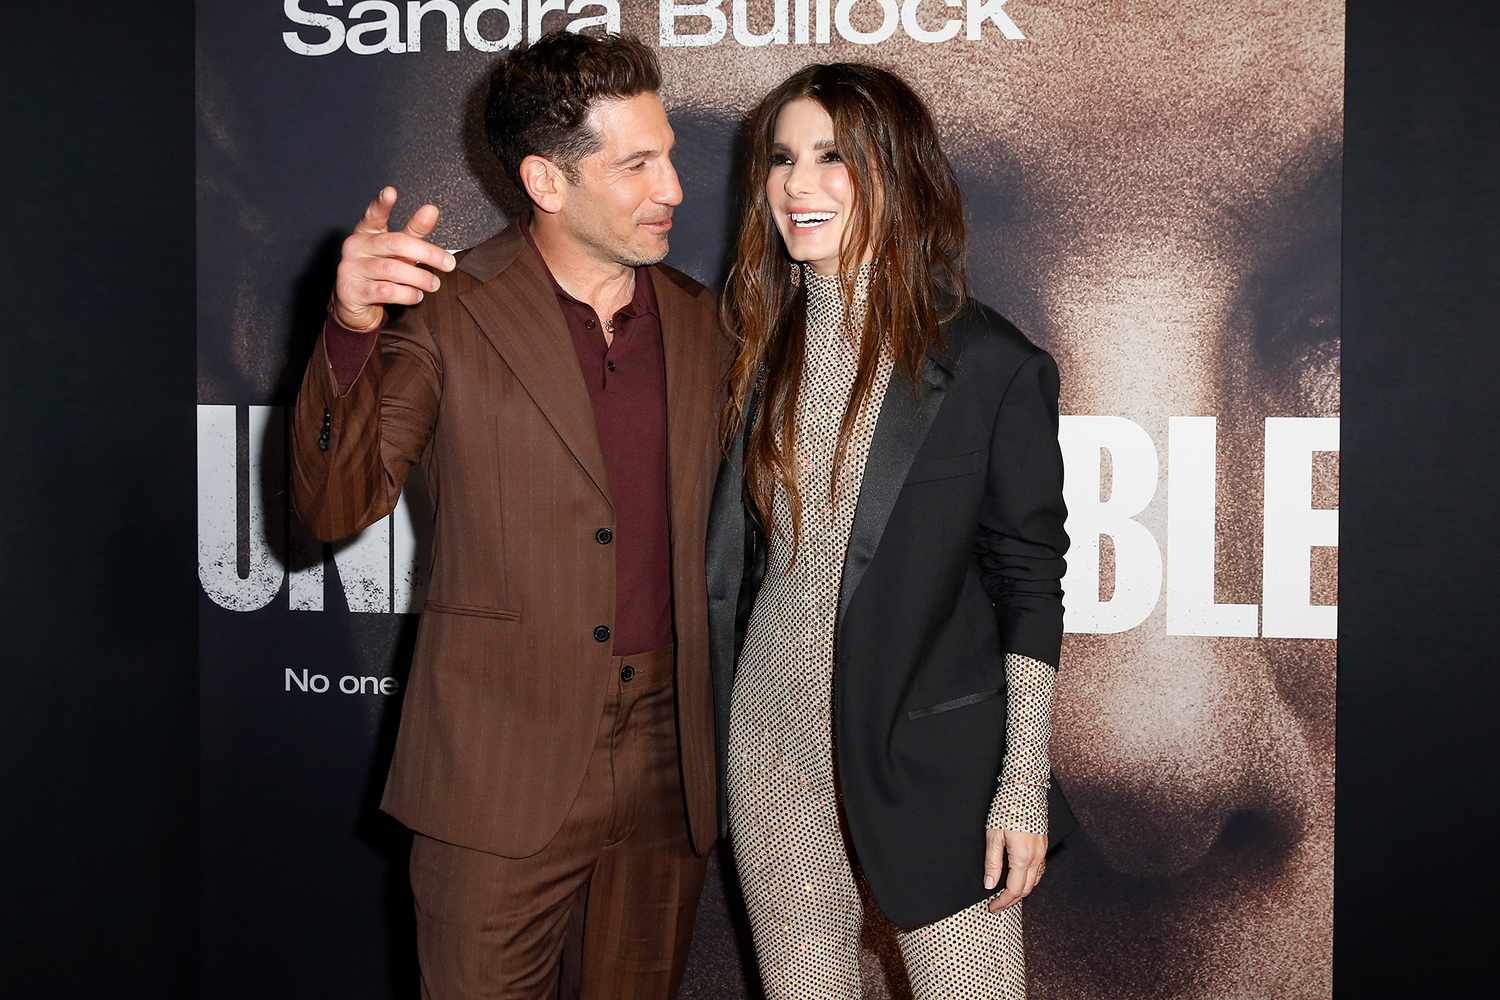 LOS ANGELES, CALIFORNIA - NOVEMBER 30: (L-R) Jon Bernthal and Sandra Bullock attend the Netflix LA Premiere Of The Unforgivable on November 30, 2021 in Los Angeles, California. (Photo by Rachel Murray/Getty Images for Netflix)